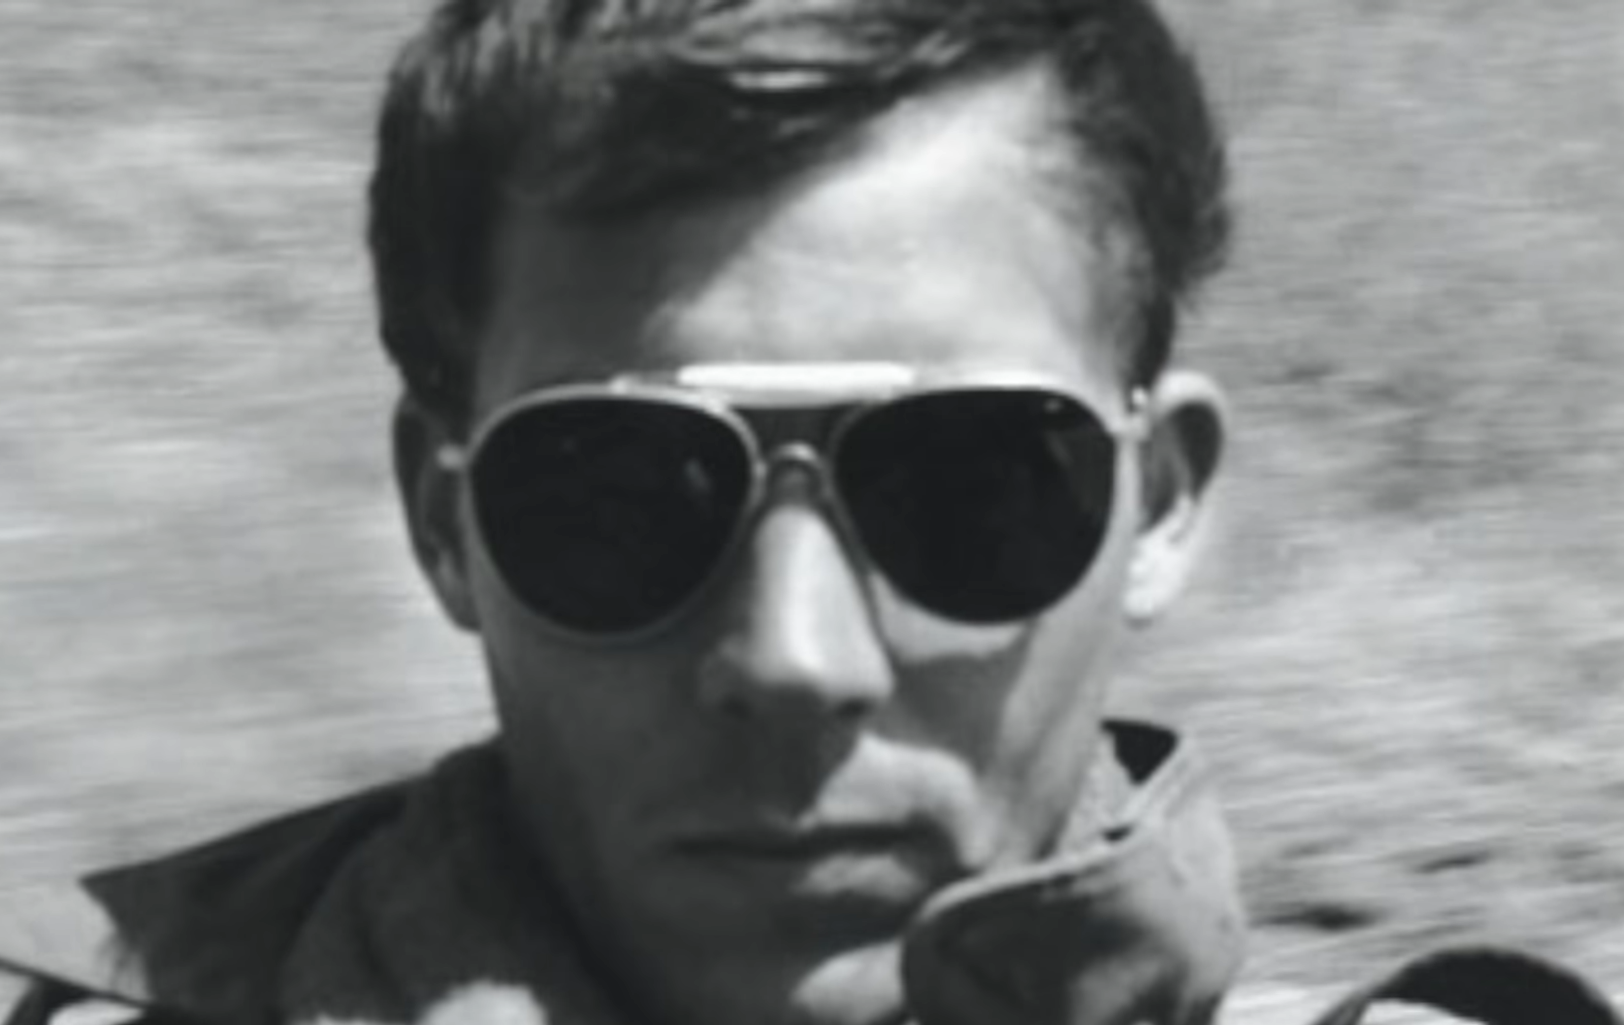 Hunter S Thompson Quotes for Life, Love, and Motivation